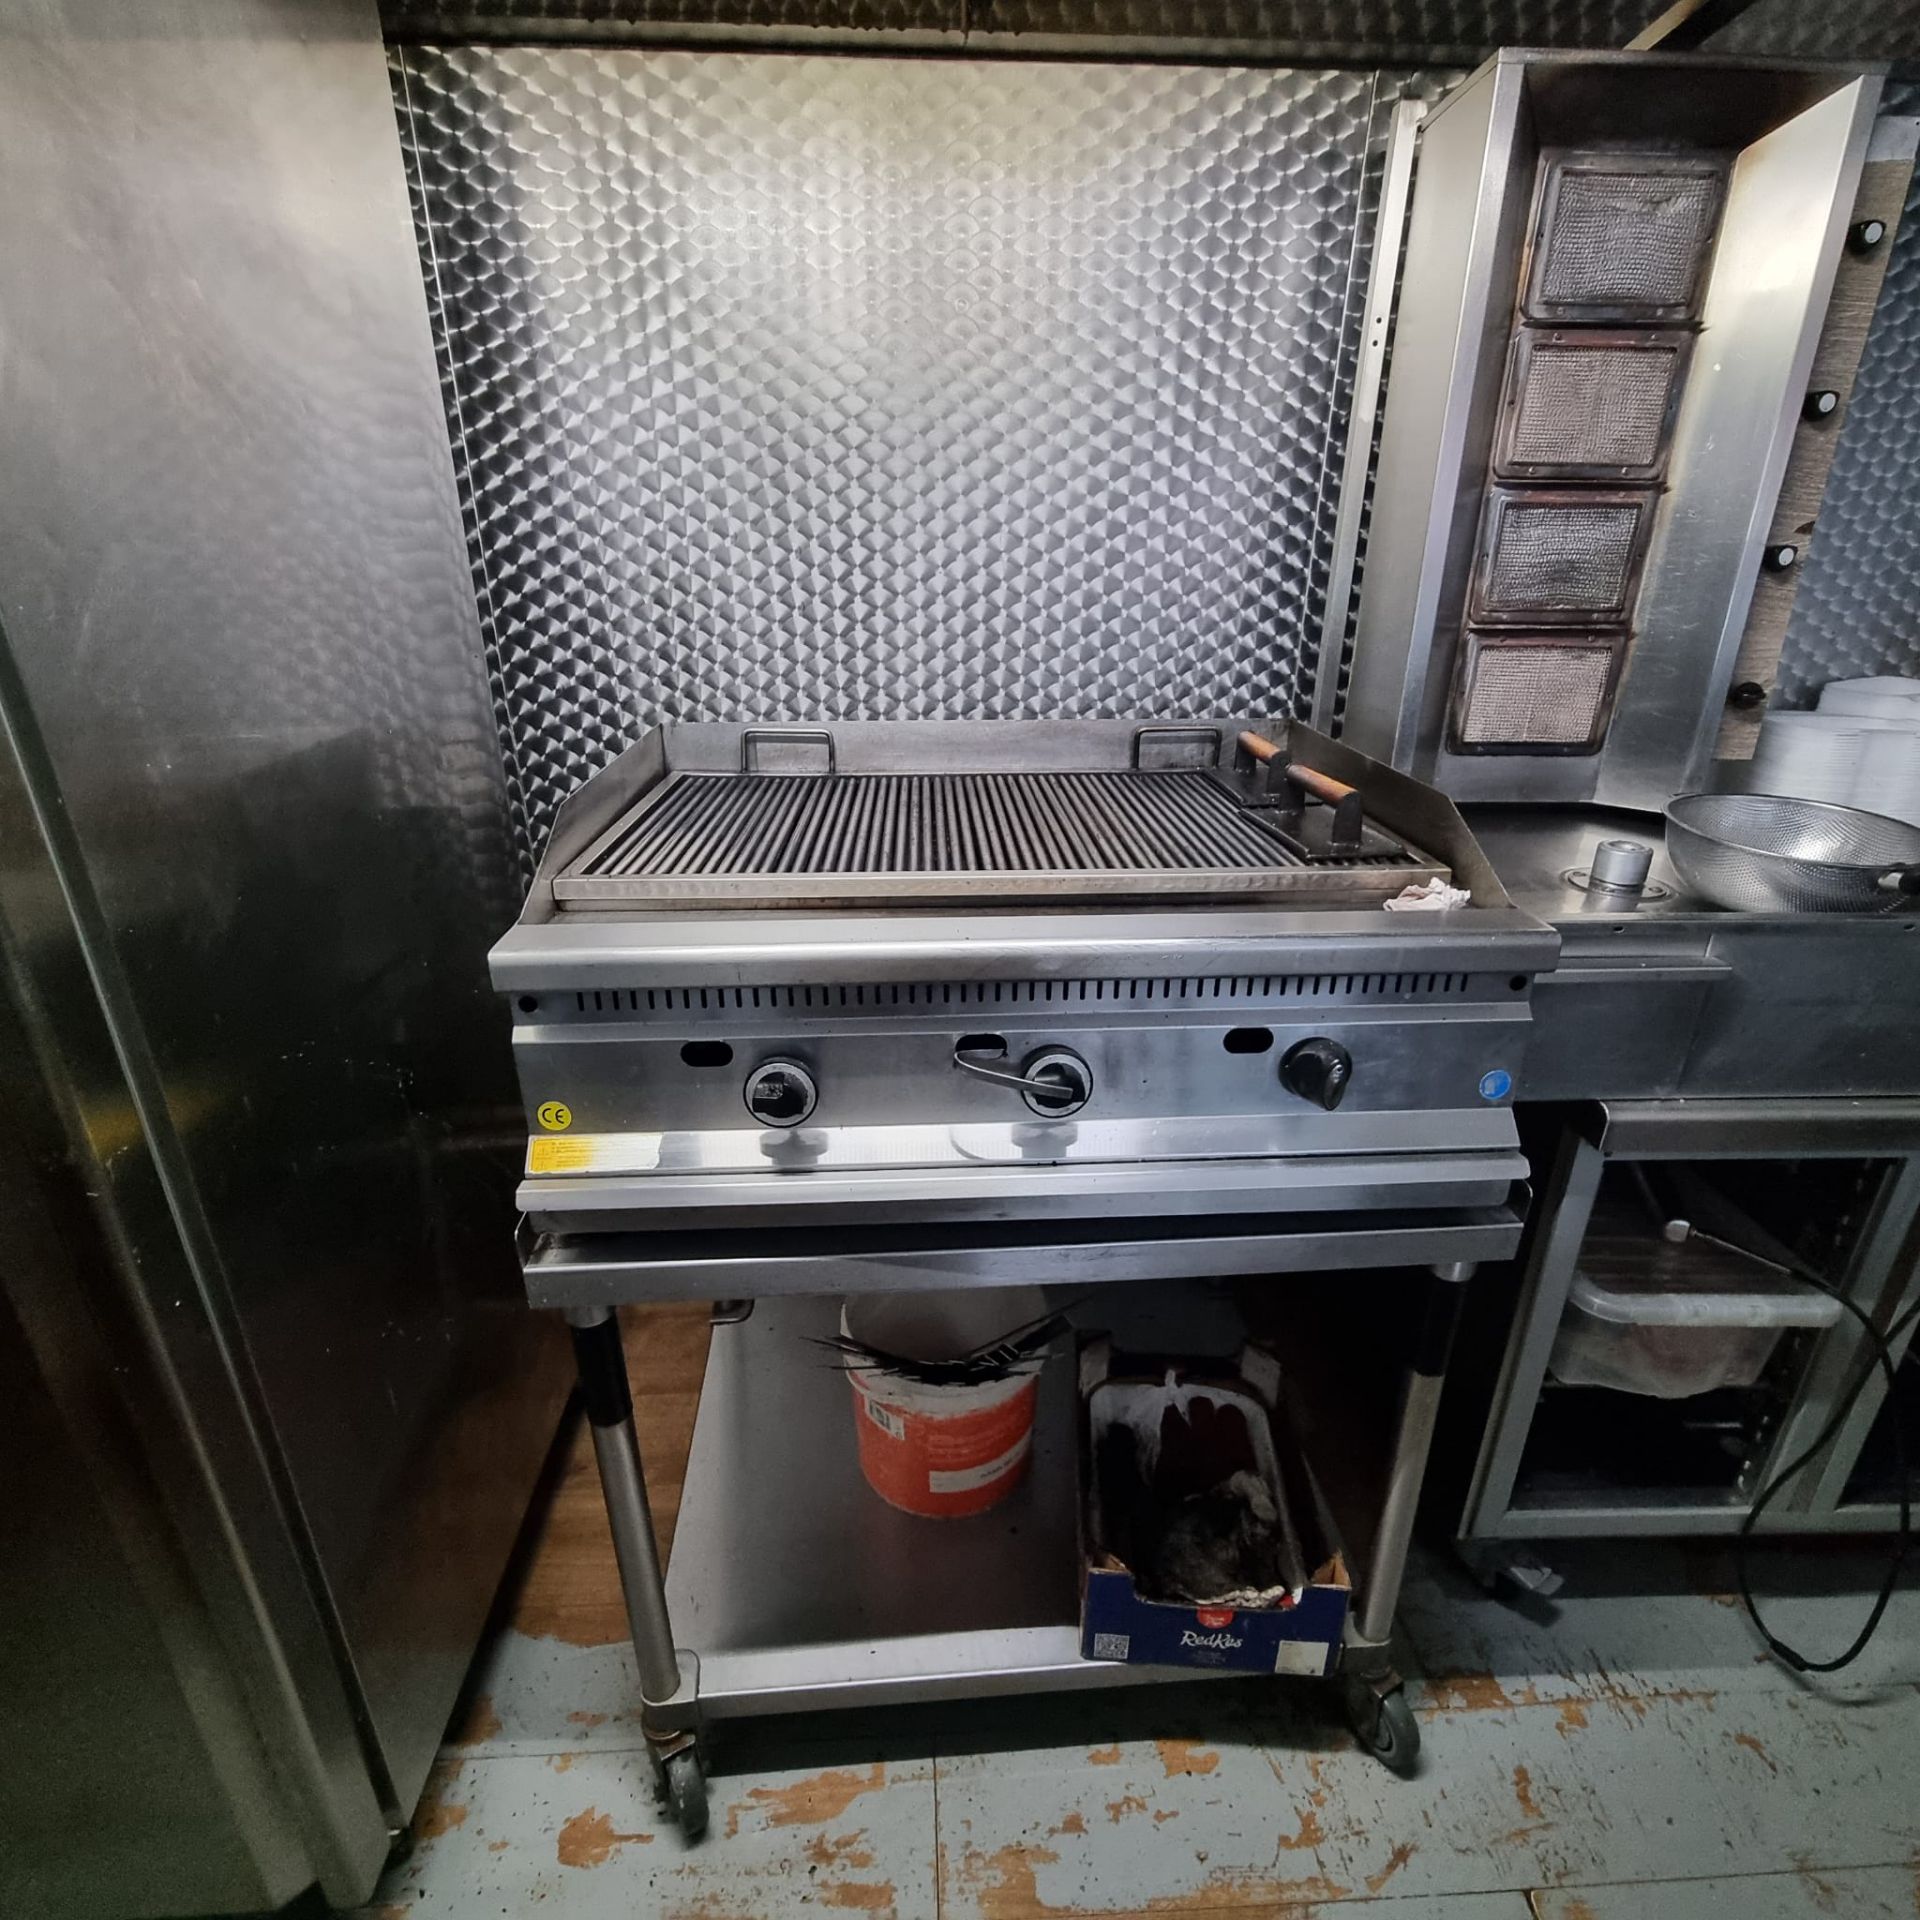 3 BURNER CHARGRILL - NATURAL GAS STILL CONNECTED IN SHOP - 900 MMW  - WATER TRAY UNDER